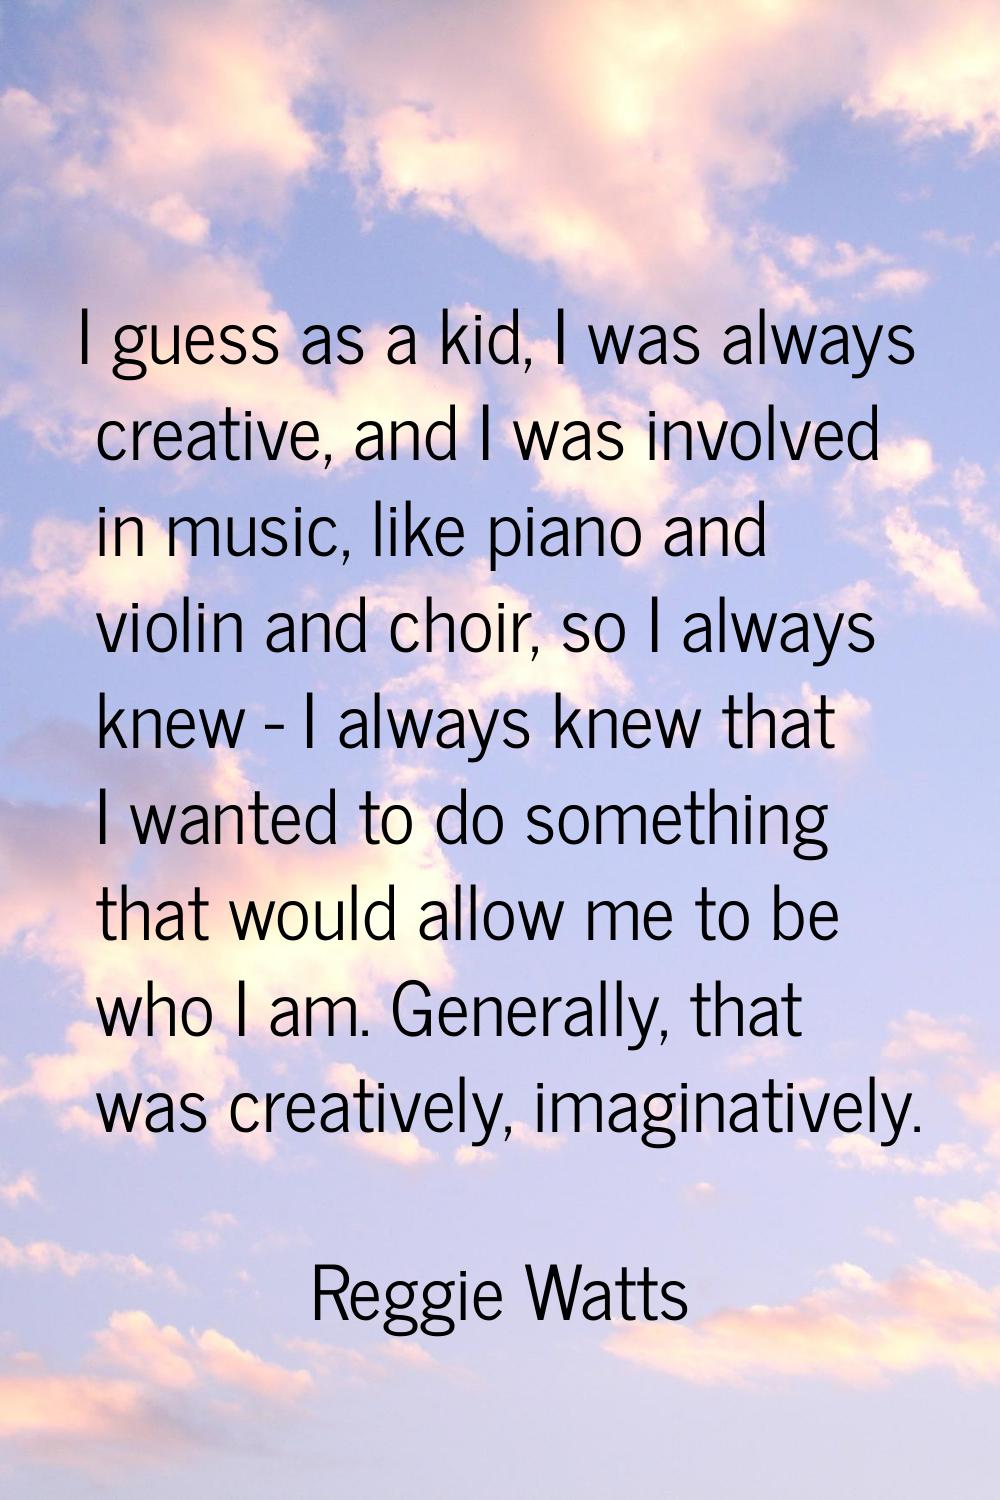 I guess as a kid, I was always creative, and I was involved in music, like piano and violin and cho